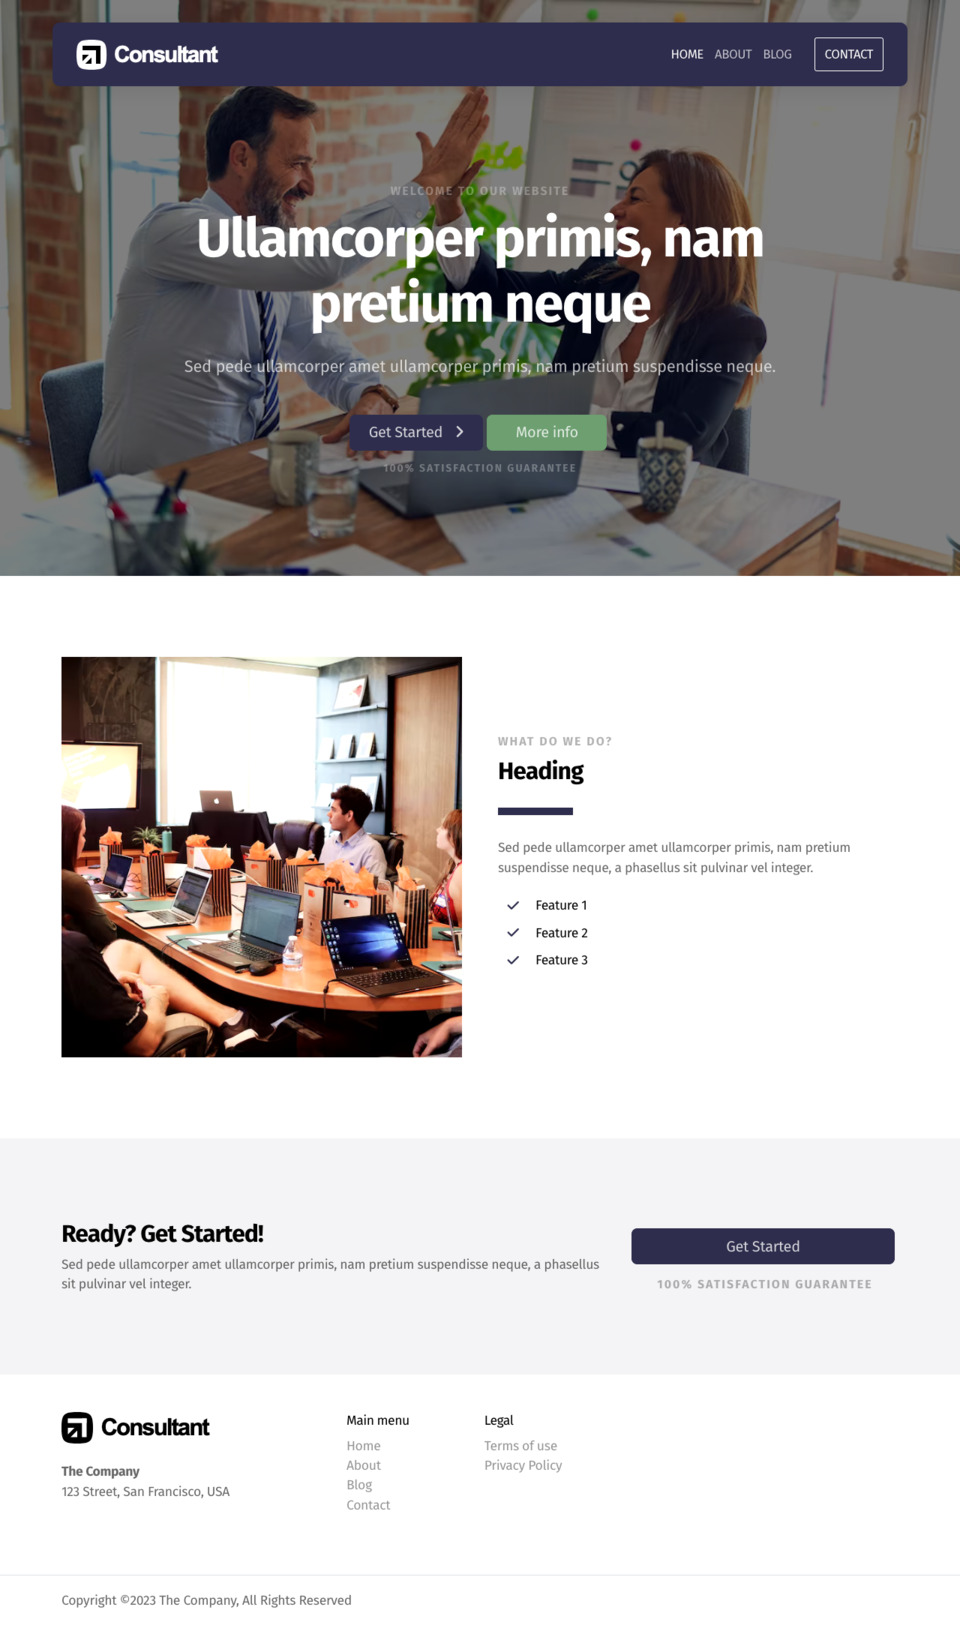 Consultant 2 Website Template - Ideal for small businesses, consultants, advisors, managers, and professionals looking to create a personalized website with ease.